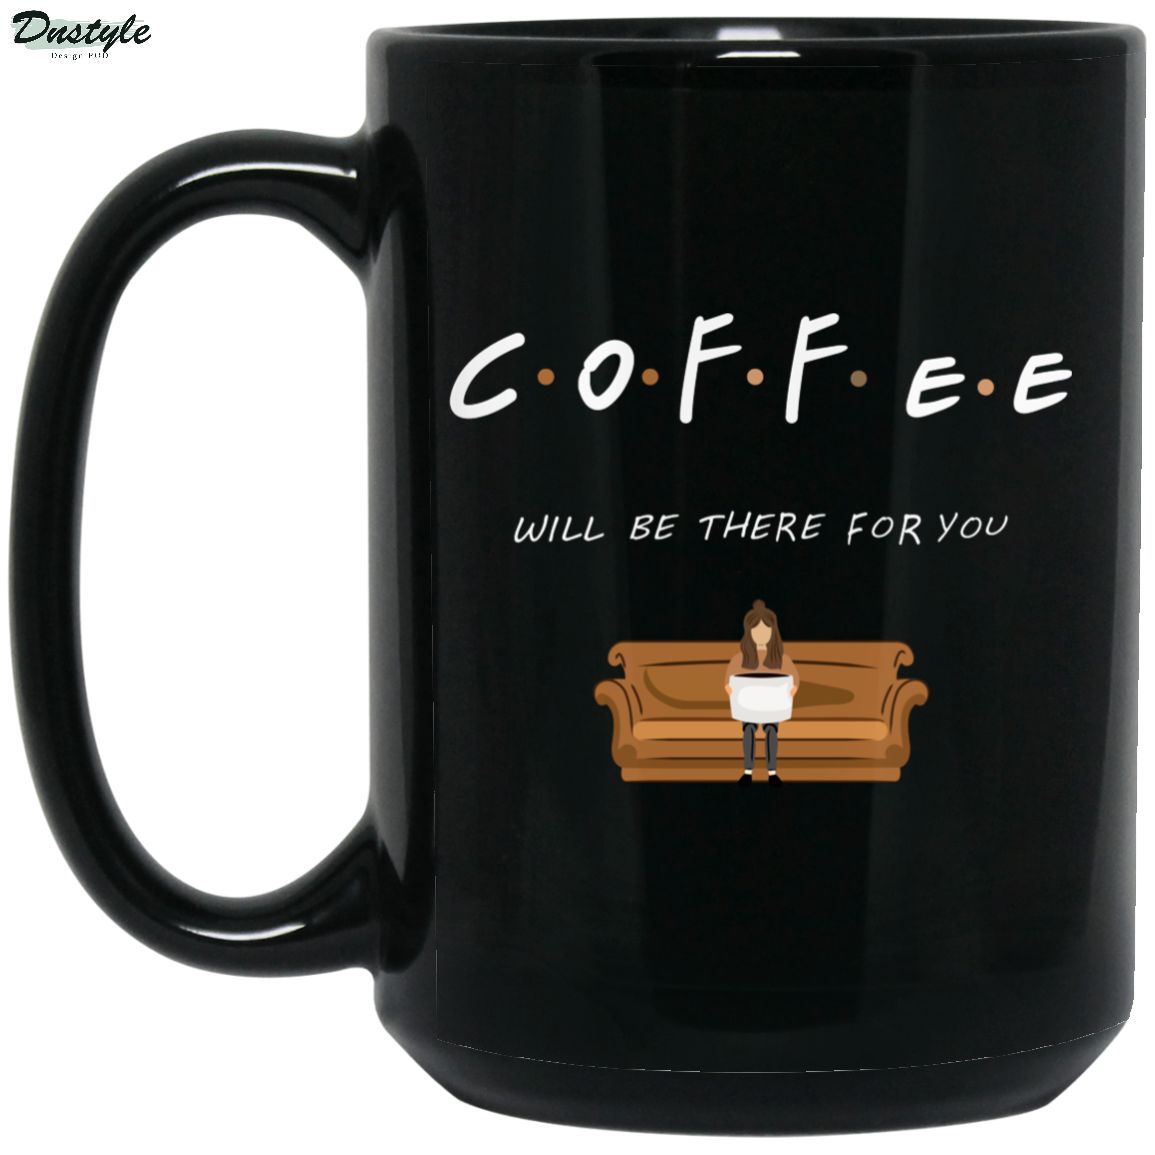 Coffee FRIENDS will be there for you mug